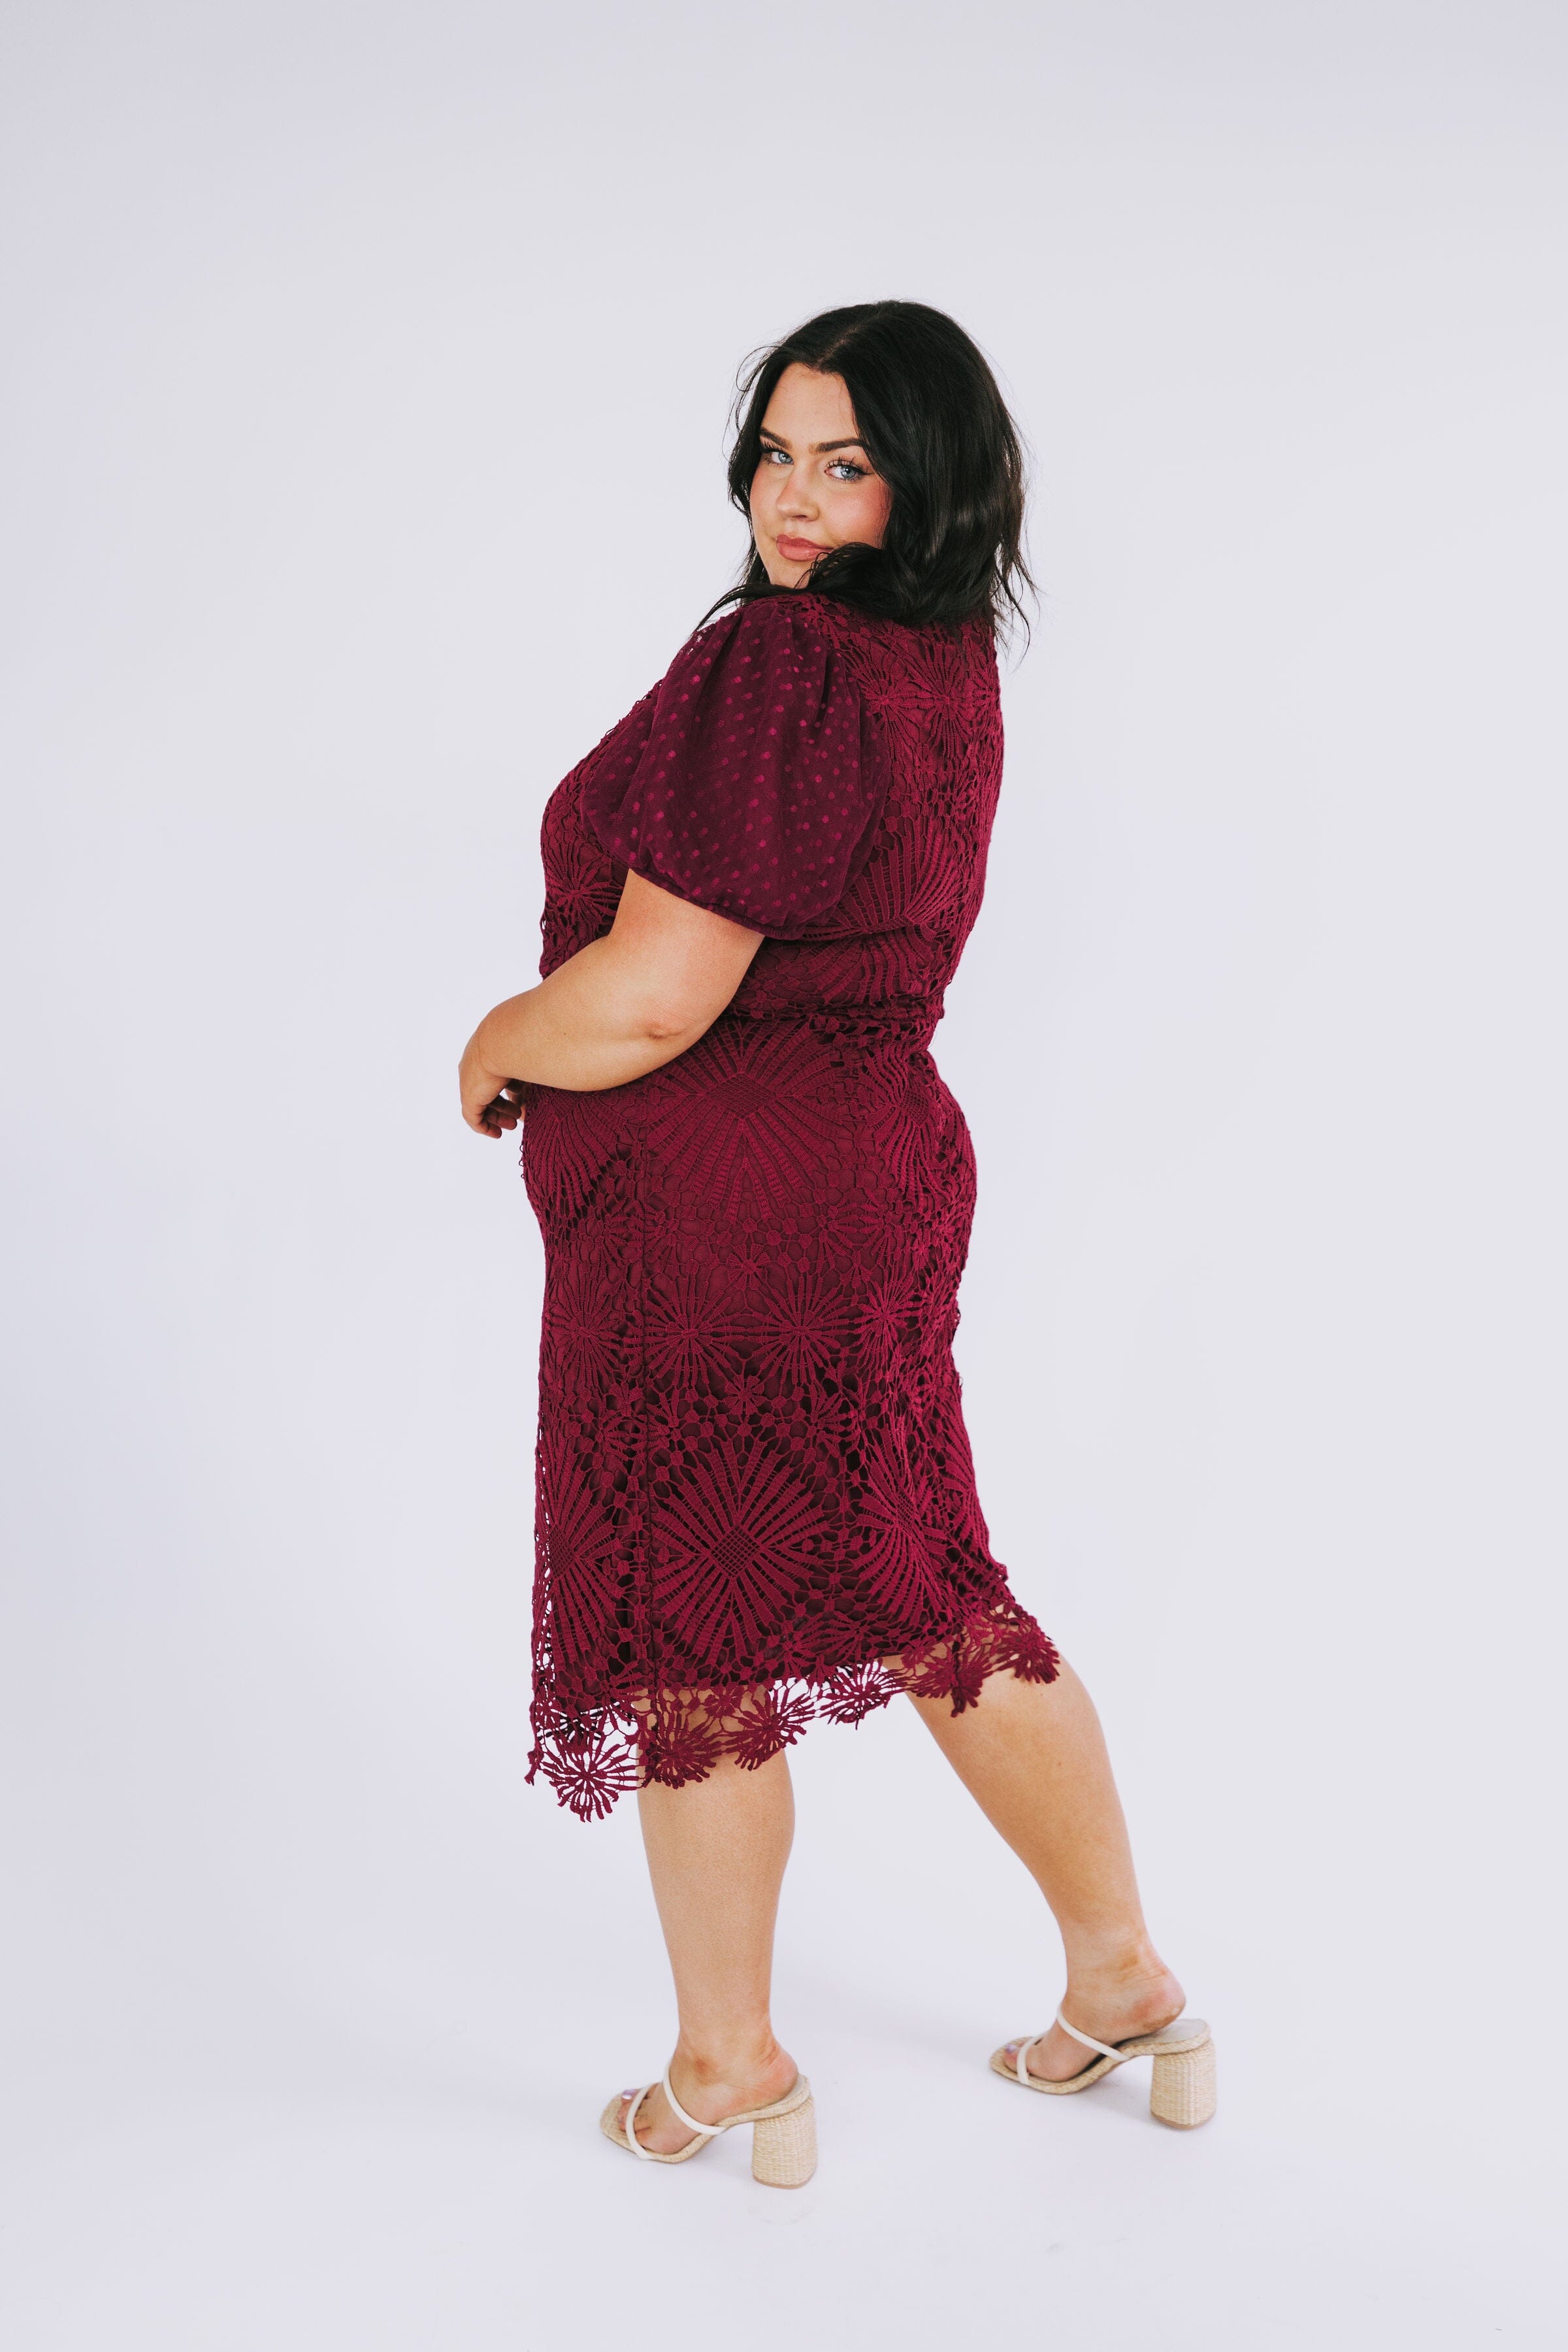 ONE LOVED BABE - Helena Dress - 2 Colors!